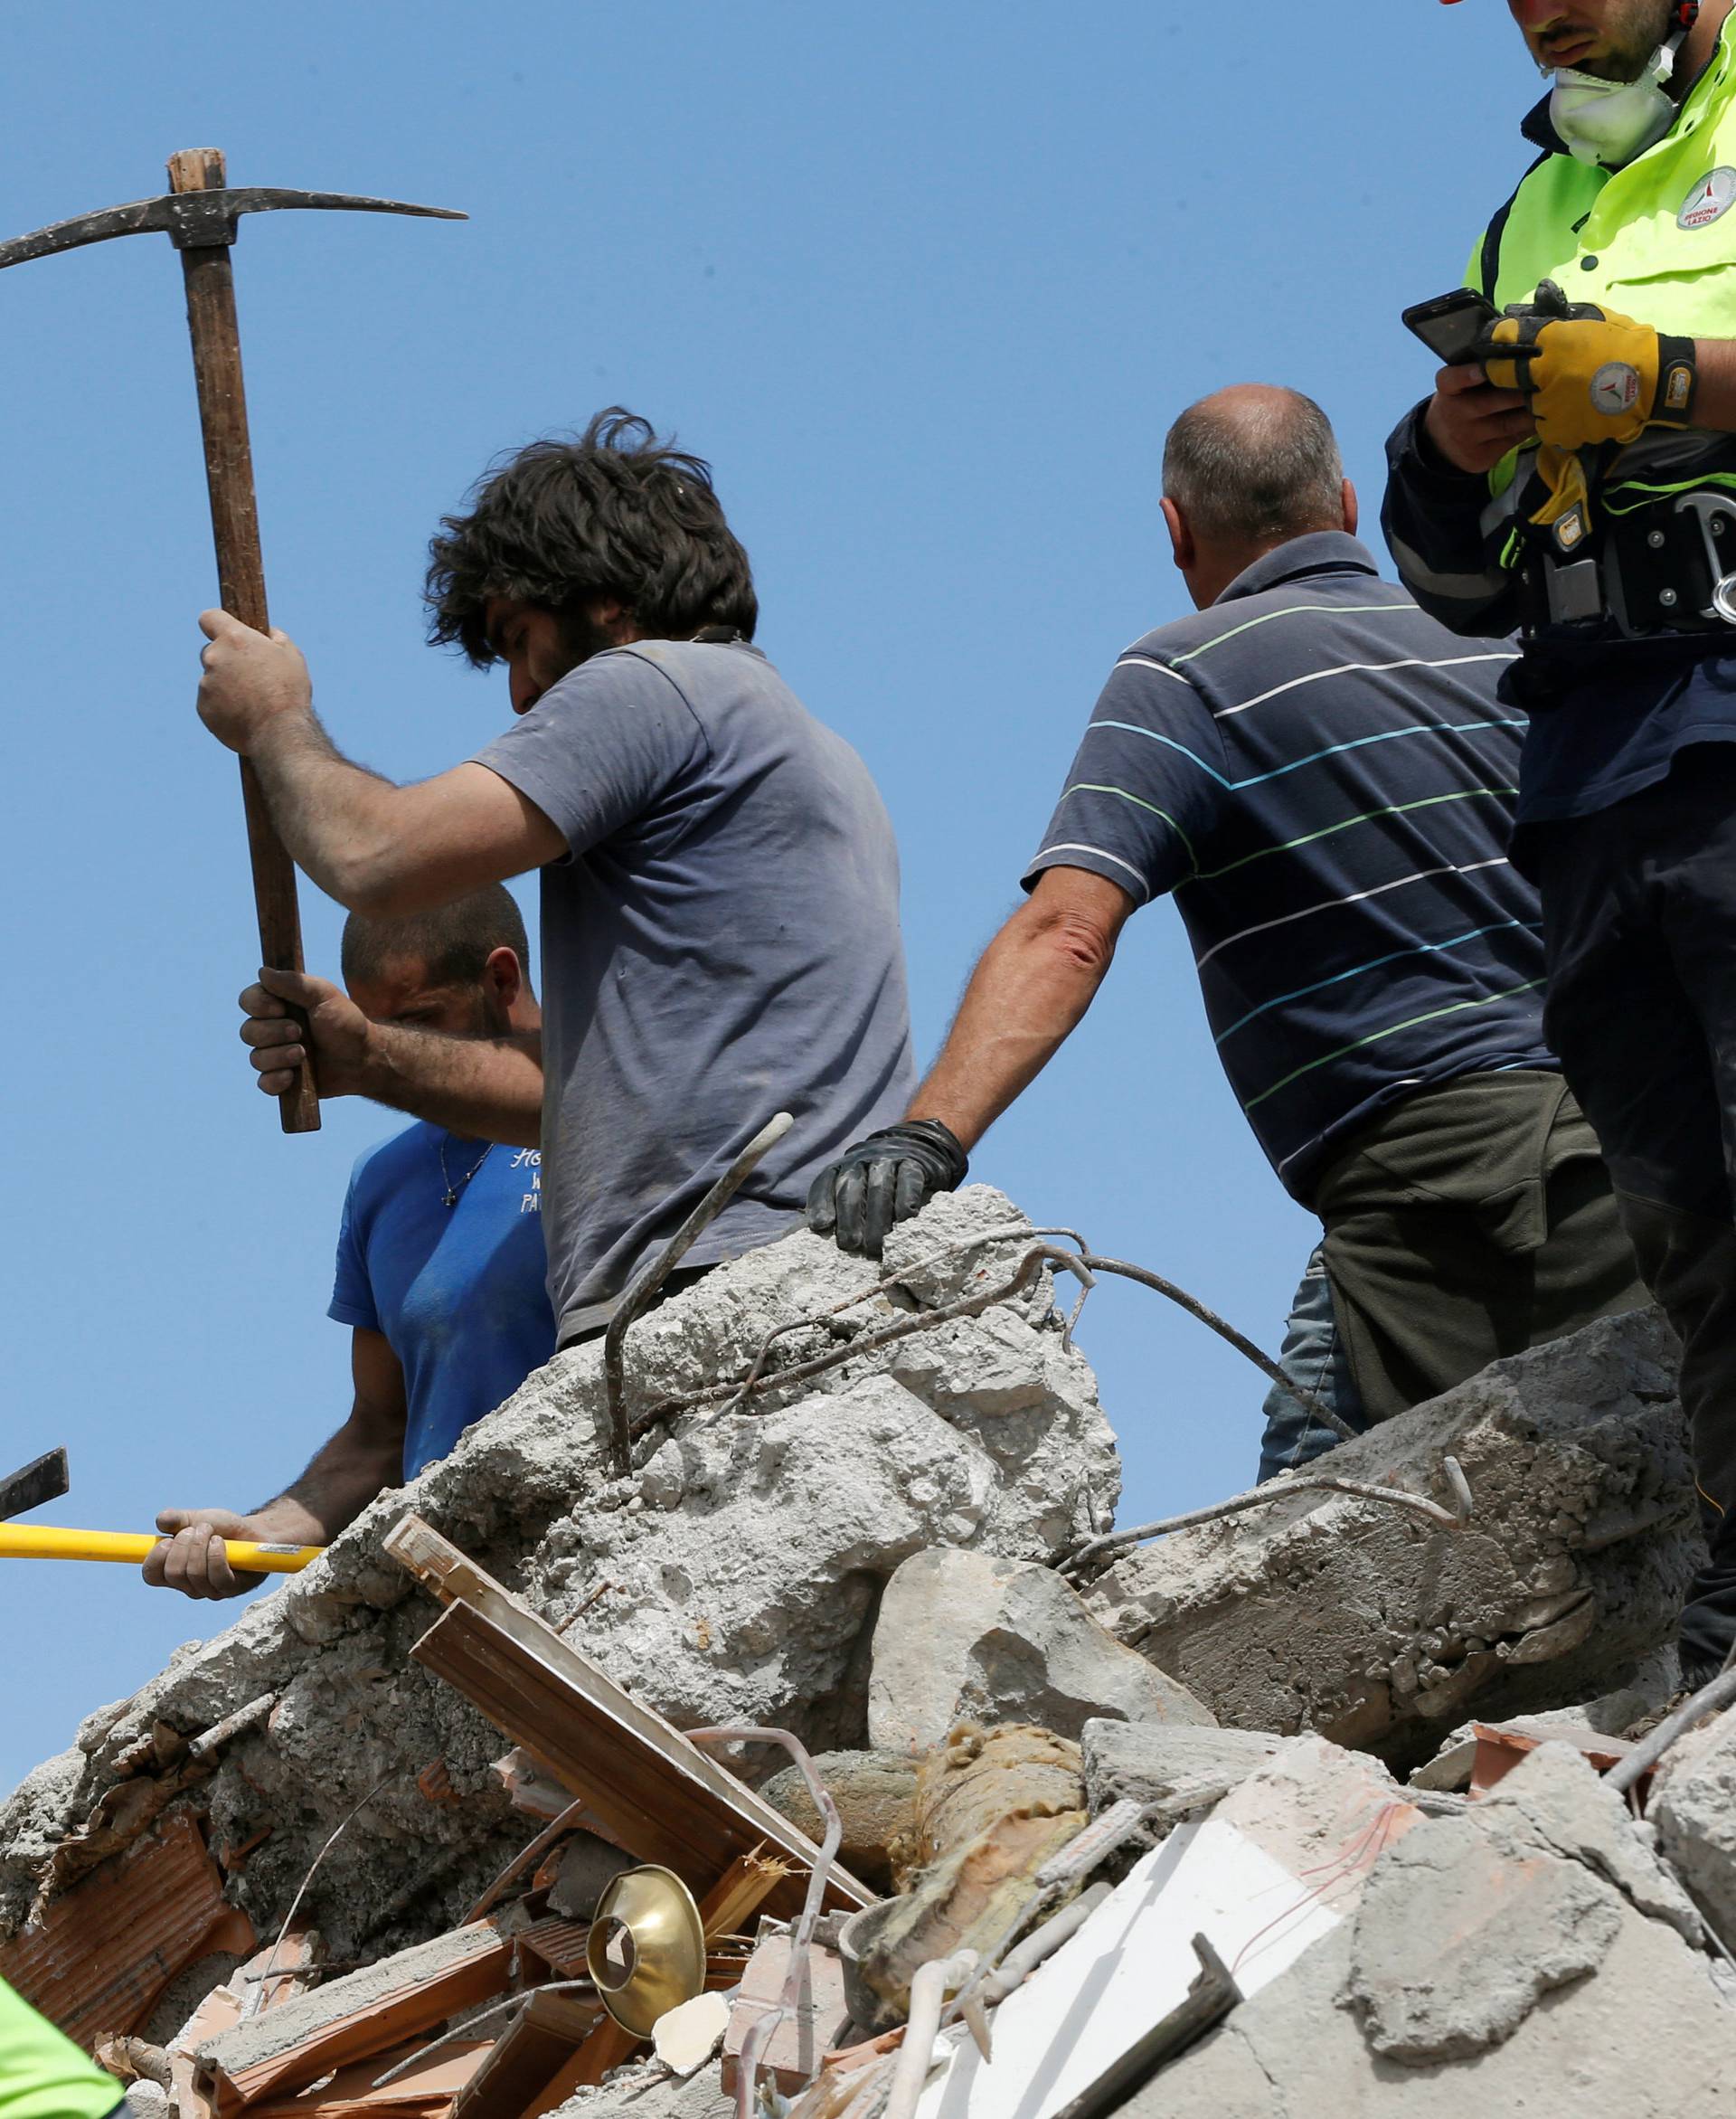 Rescuers work on a collapsed building following an earthquake in Amatrice